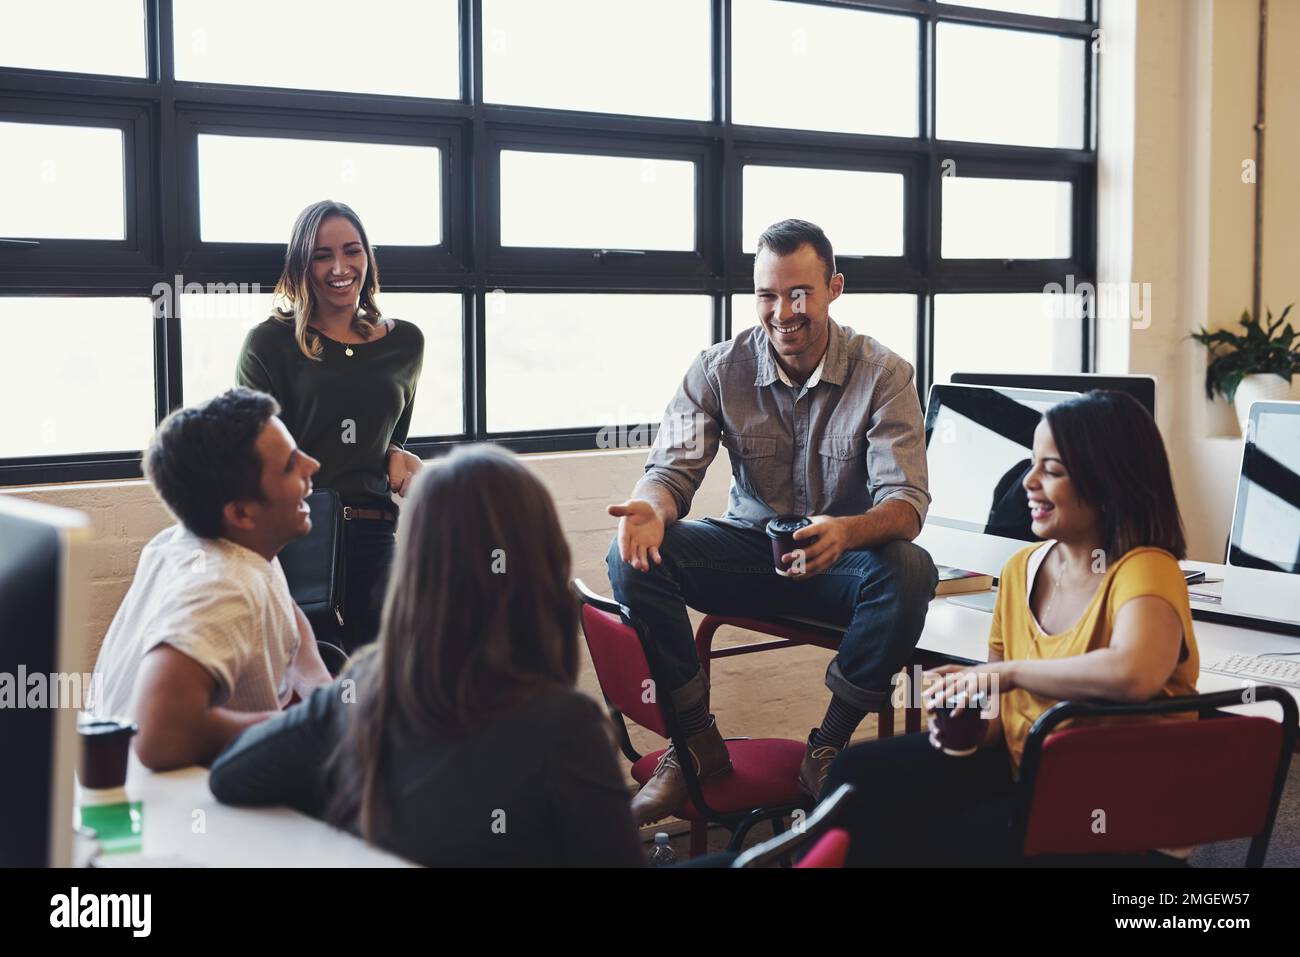 Our meetings are always fun yet insightful. creative employees having a meeting in a modern office. Stock Photo